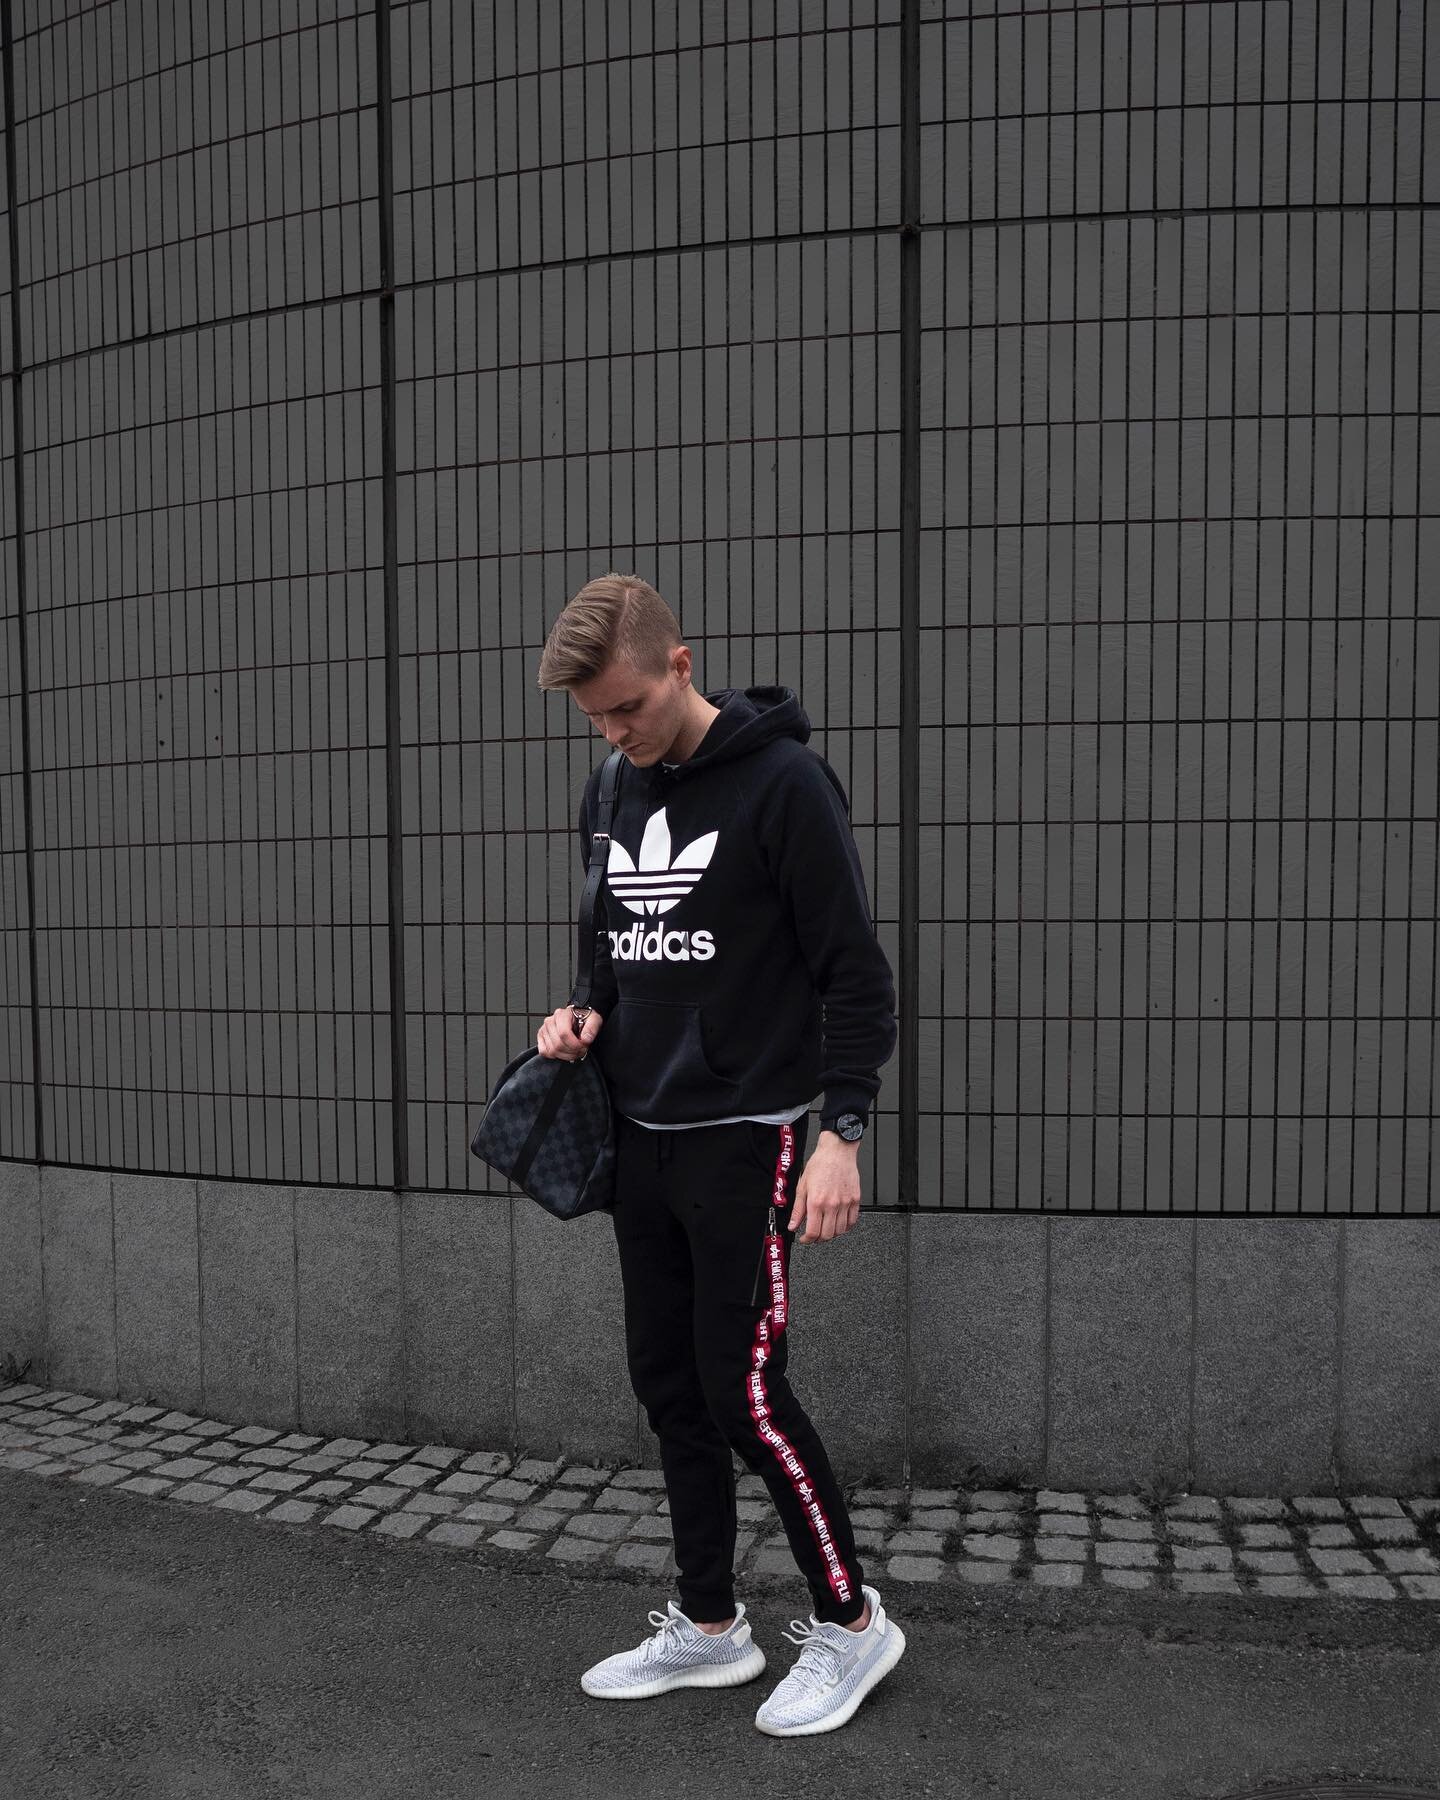 Need help with this: Berlin or Amsterdam? 🤔
________________________________________
#ootdfinland #menwithstreetstyle #alphaindustries #adidasoriginals #streetstyleoutfit #menstreetstyle #yesadidas #yeezyboost #streetstyleinspo #blvckmedia #blvck #b